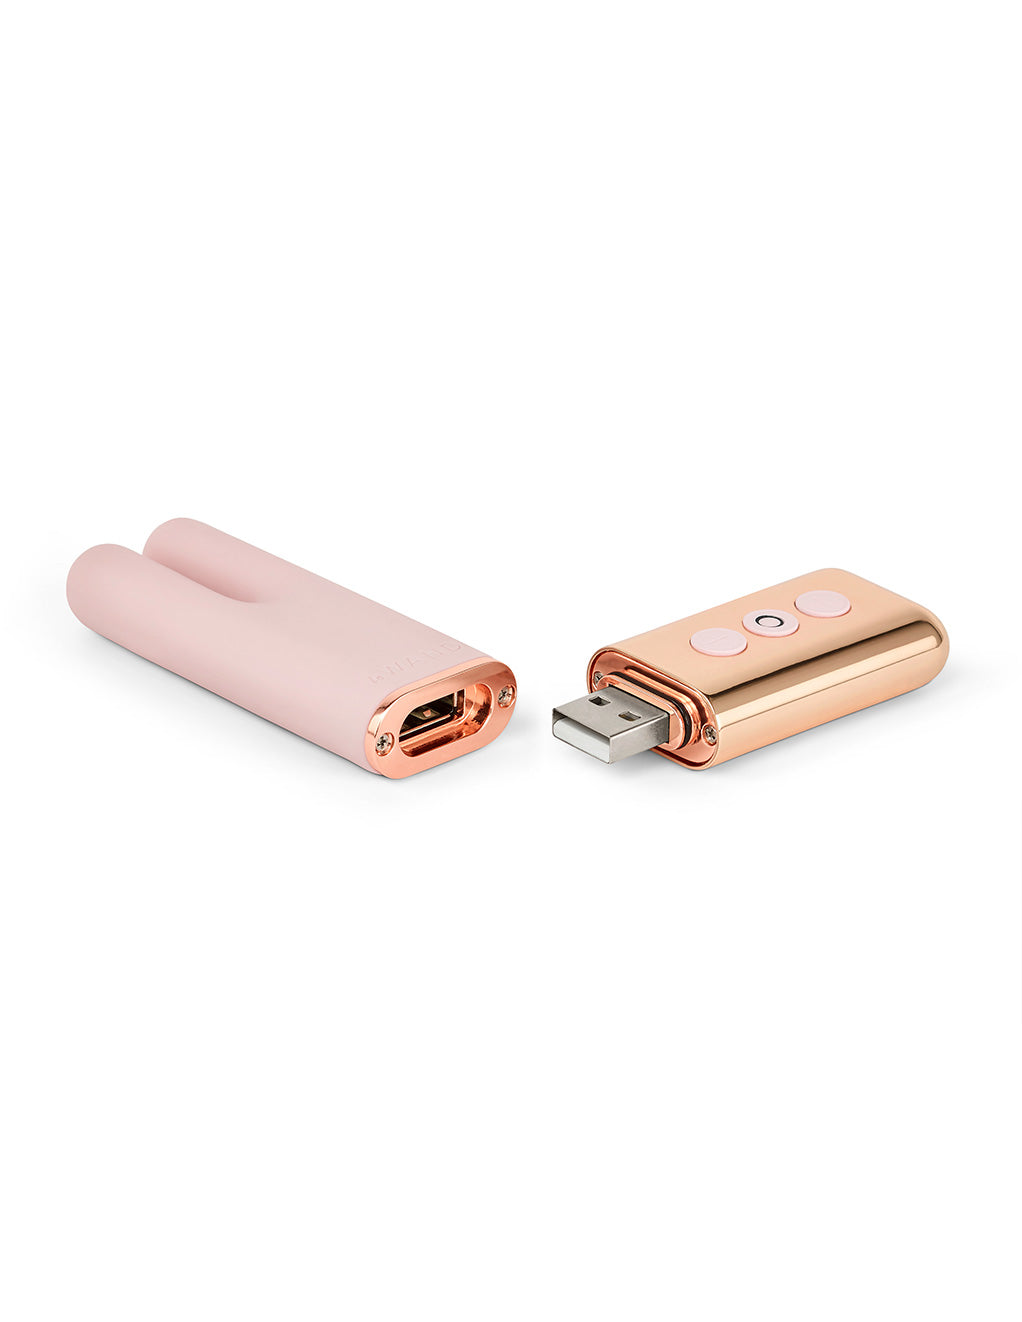 Le Wand Deux Rechargeable Clitoral Vibrator- Rose Gold- Charging